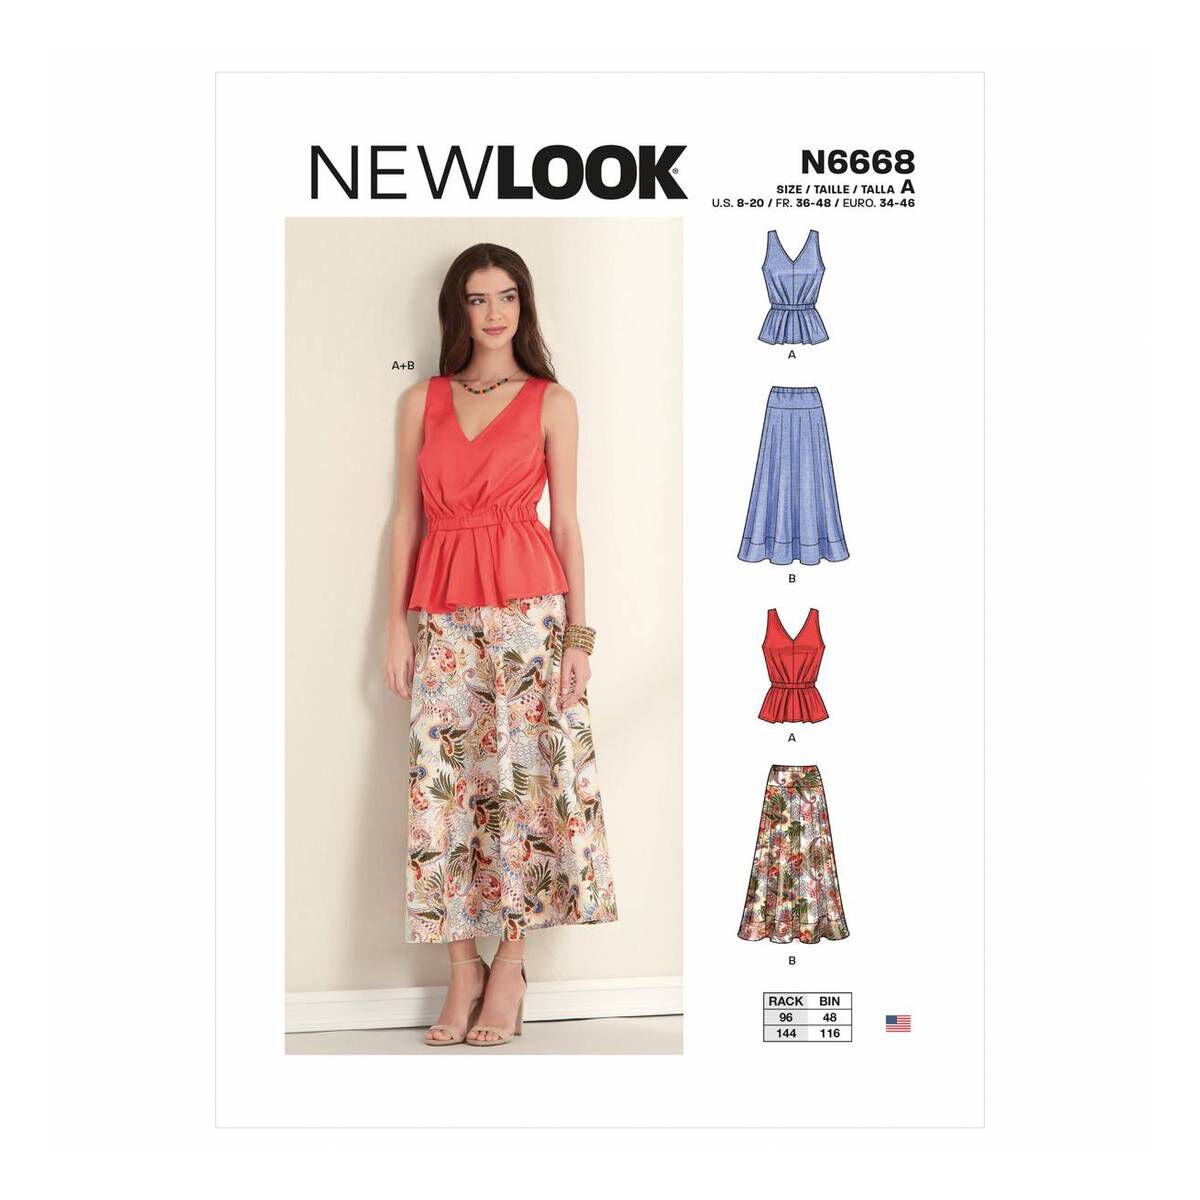 New Look Women's Top and Skirt Sewing Pattern N6668 | Hobbycraft